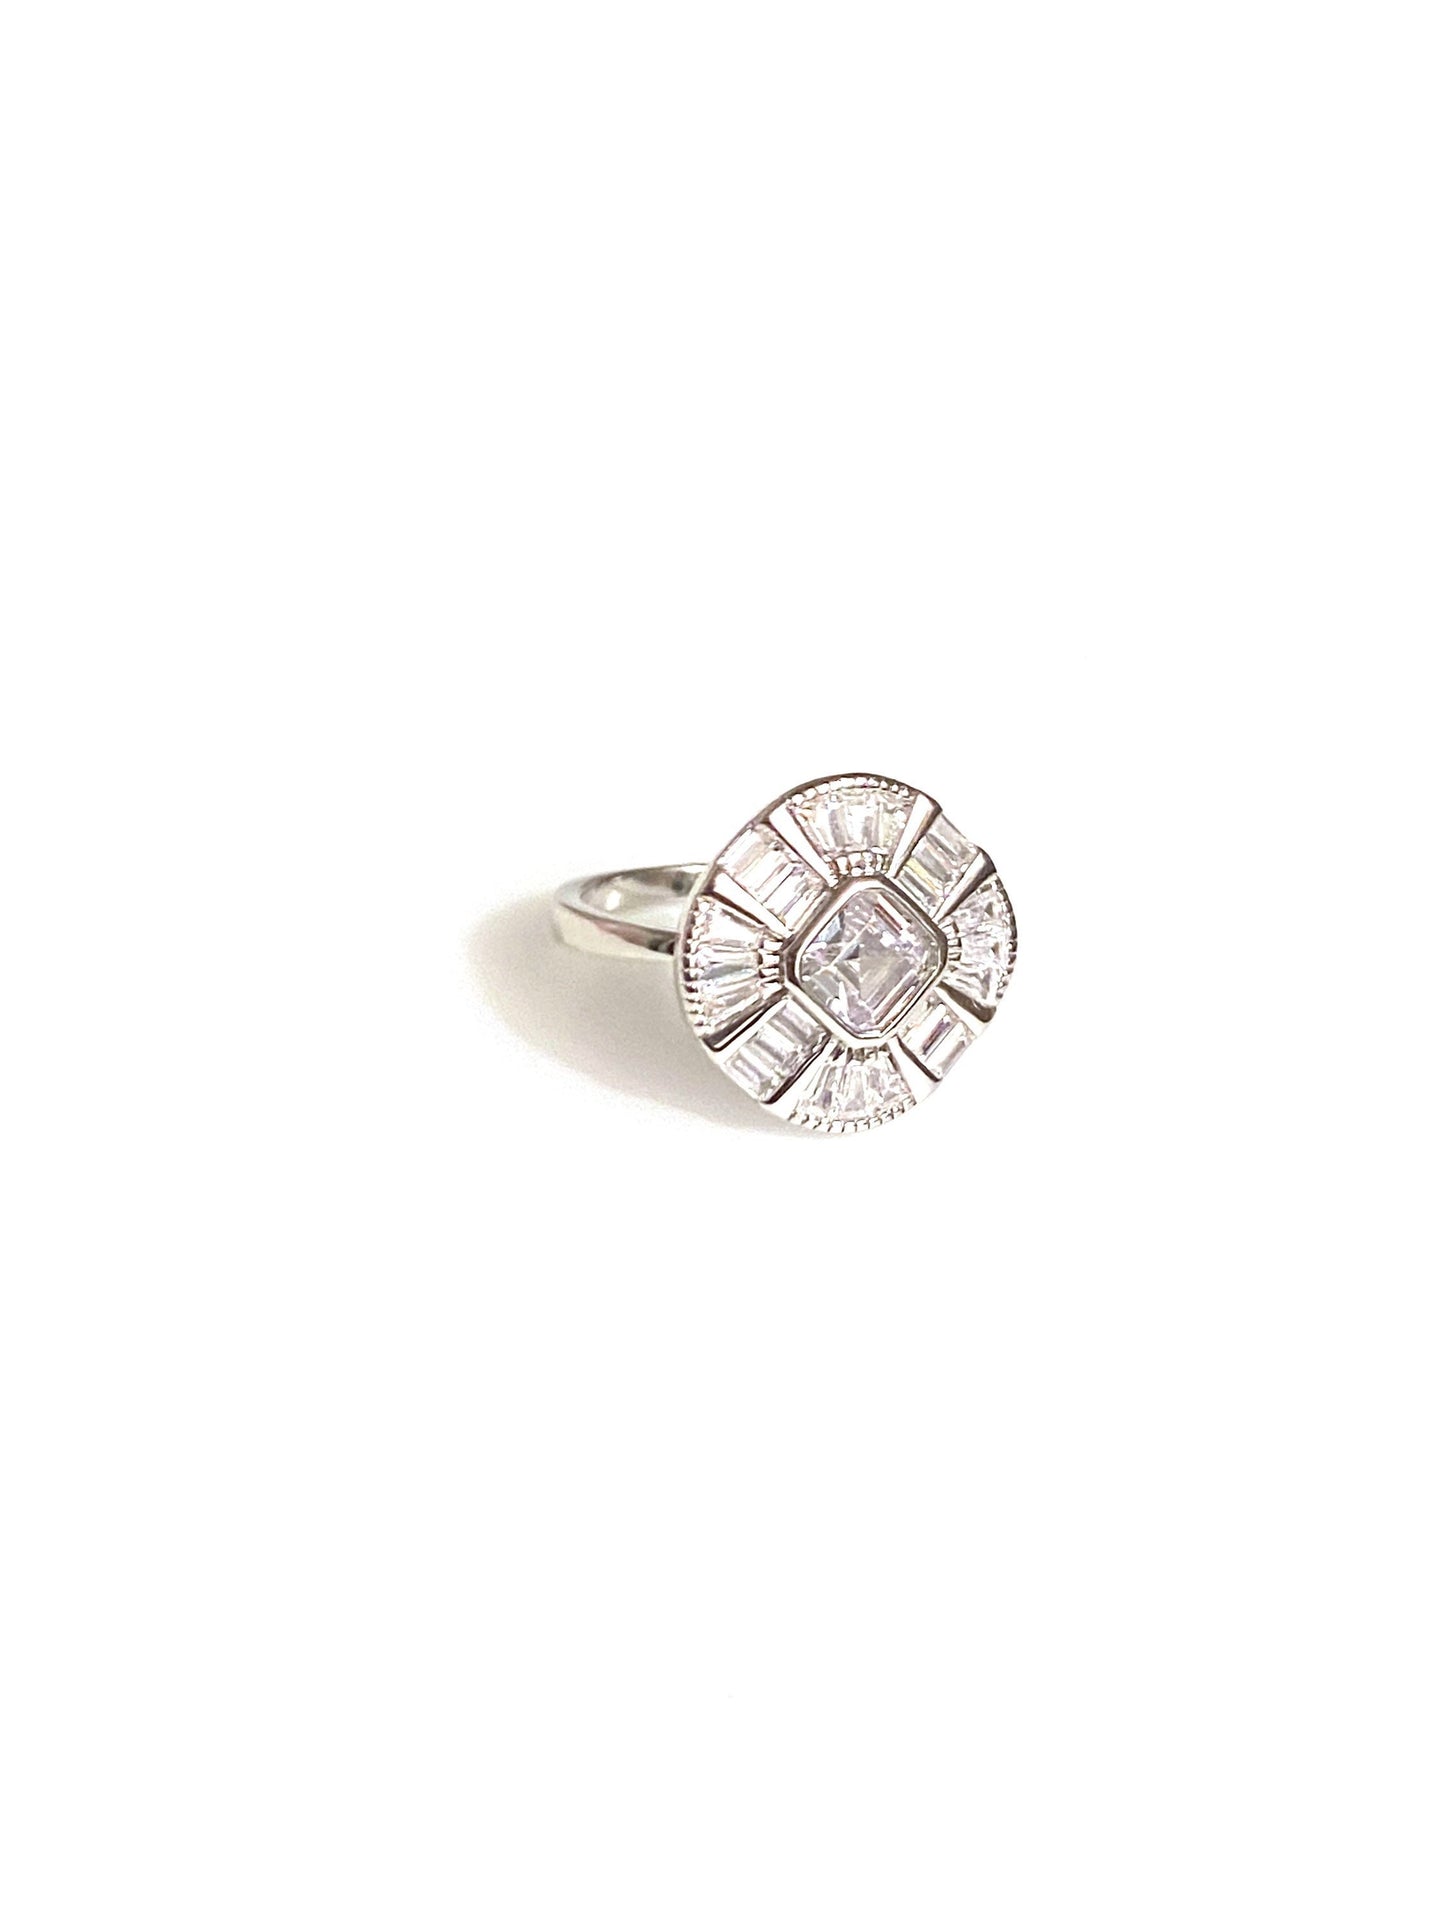 Vintage style ring (sterling silver, cubic zirconia)